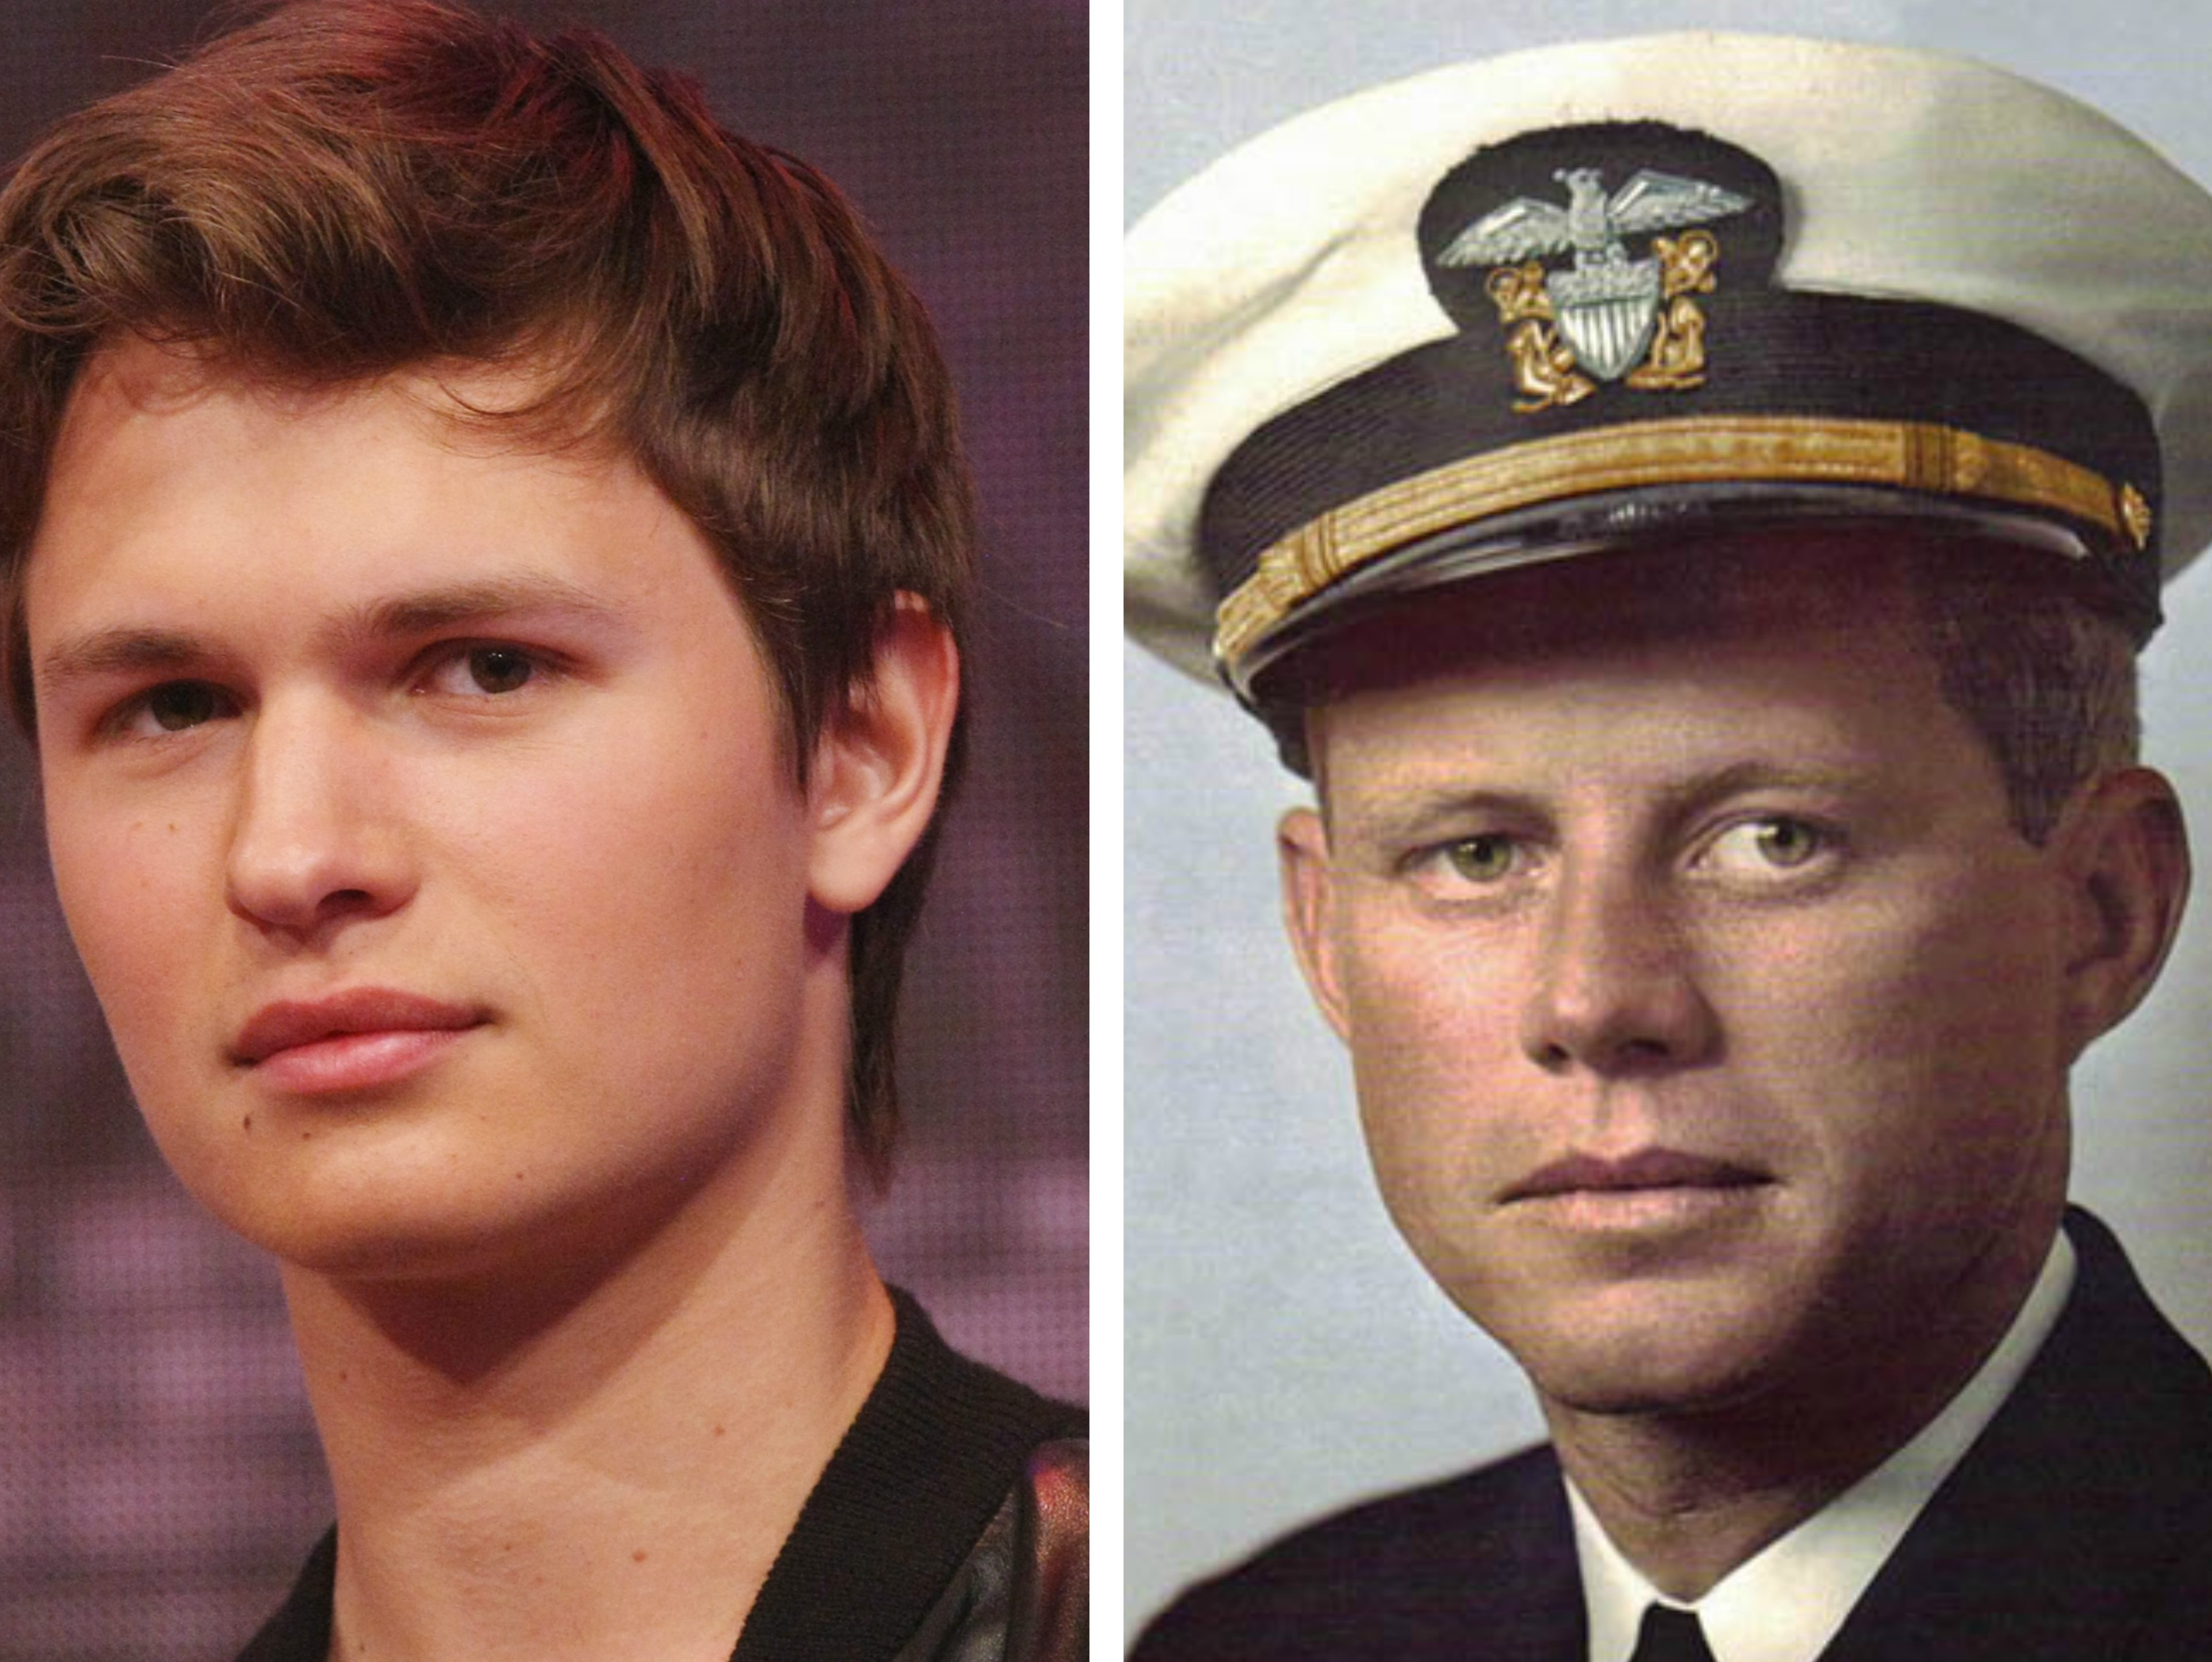 Ansel Elgort Has Been Cast as a Young JFK and It's Complete Perfection